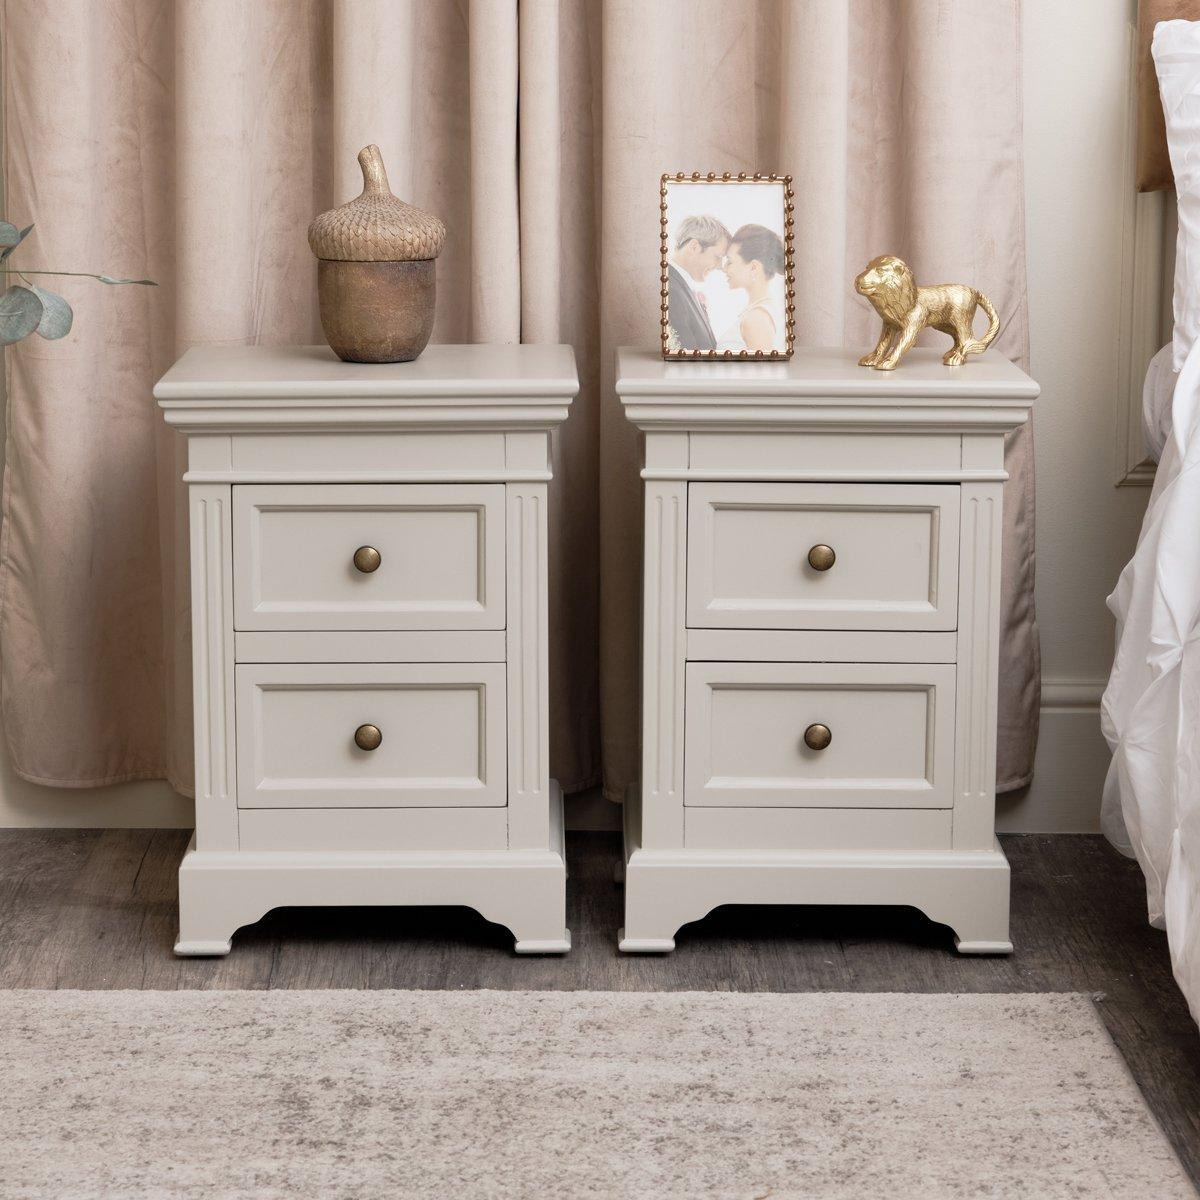 Pair Of Taupe-Grey Two Drawer Bedside Tables - Daventry Taupe-Grey Range - image 1